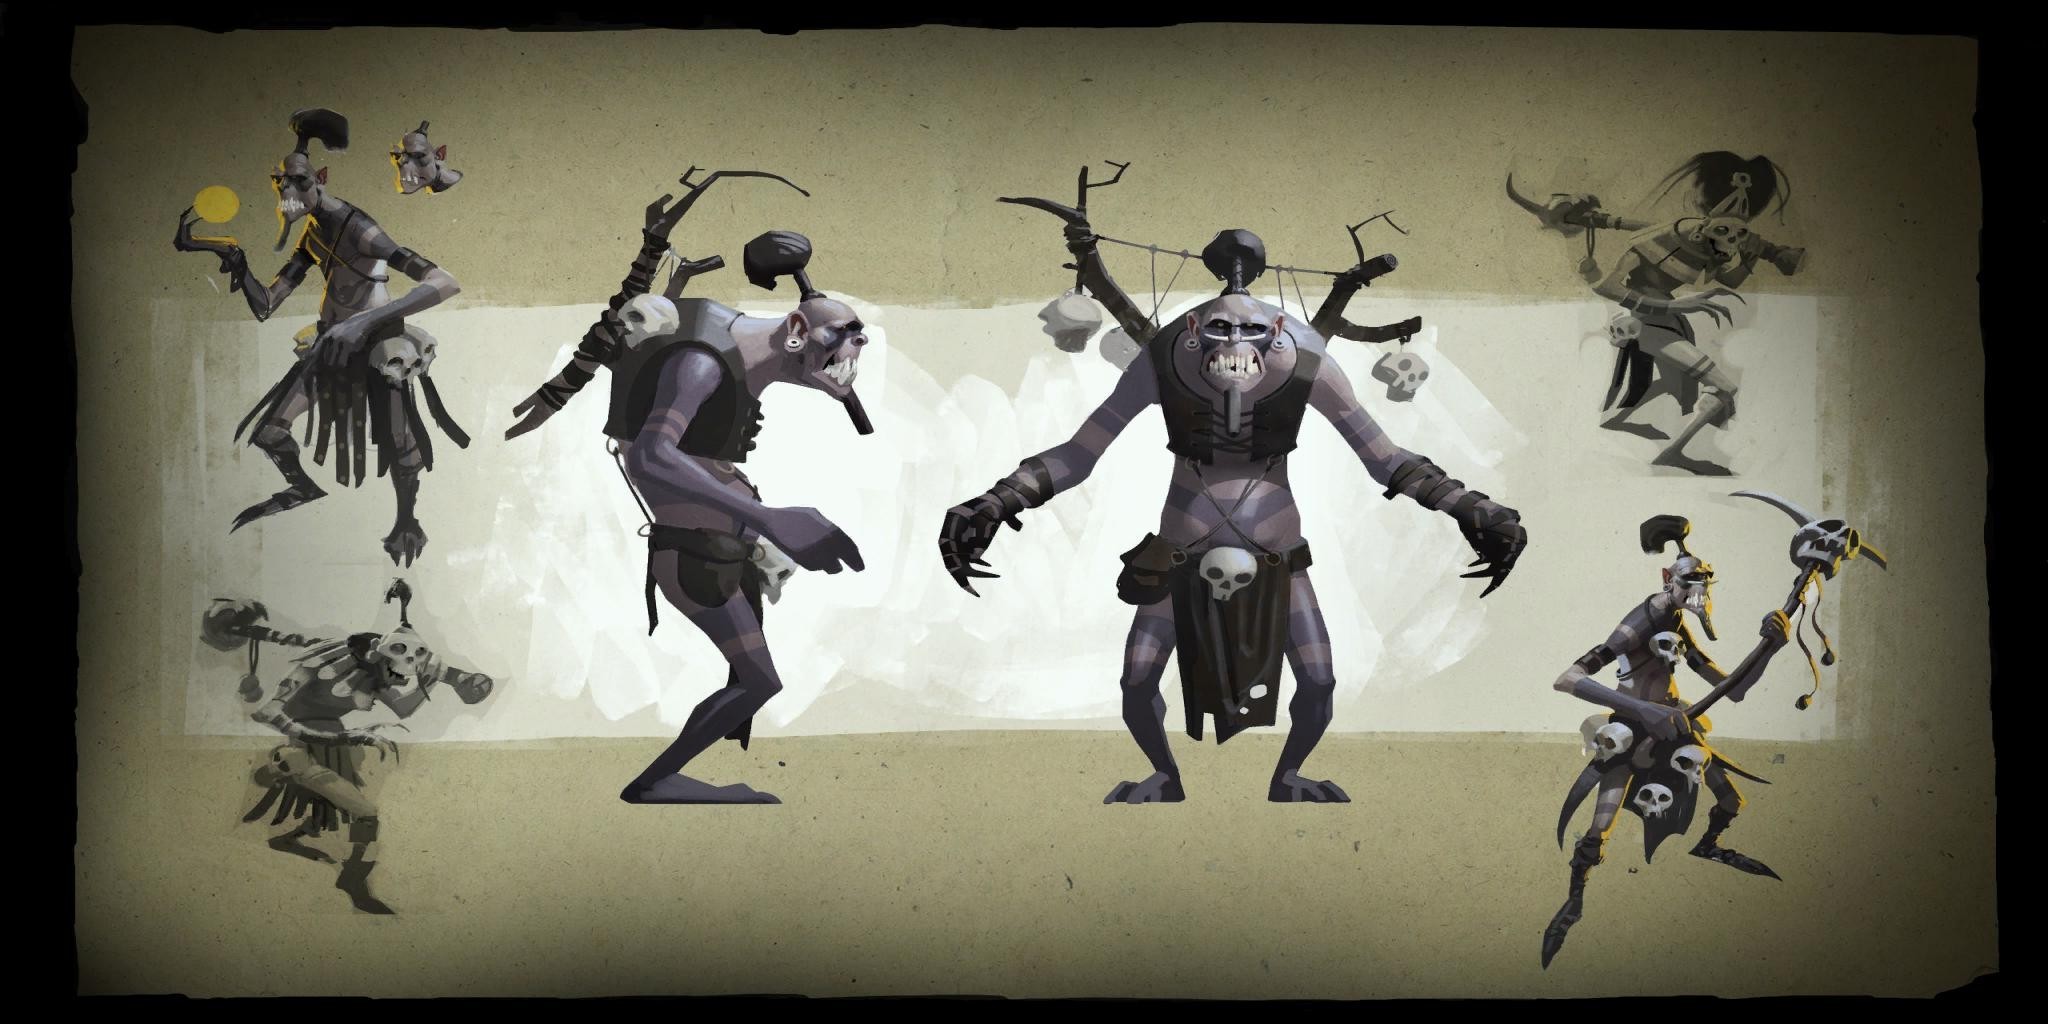 Defense Of The Ancient, Dota, Dota 2, Valve, Valve Corporation, Heroes, Video Games, Witch Doctor, Painting Wallpaper